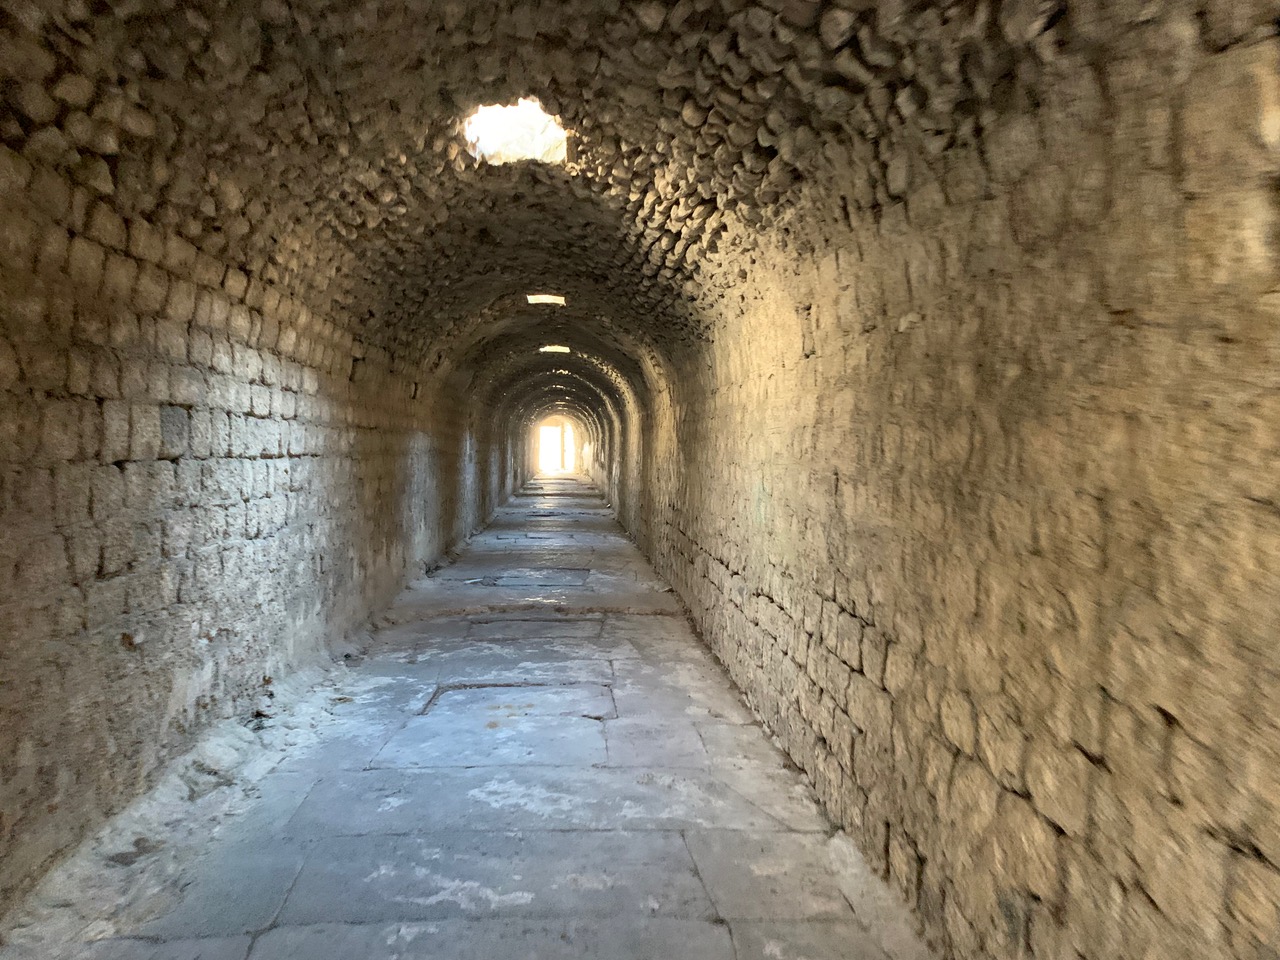 long tunnel with holes in the ceiling